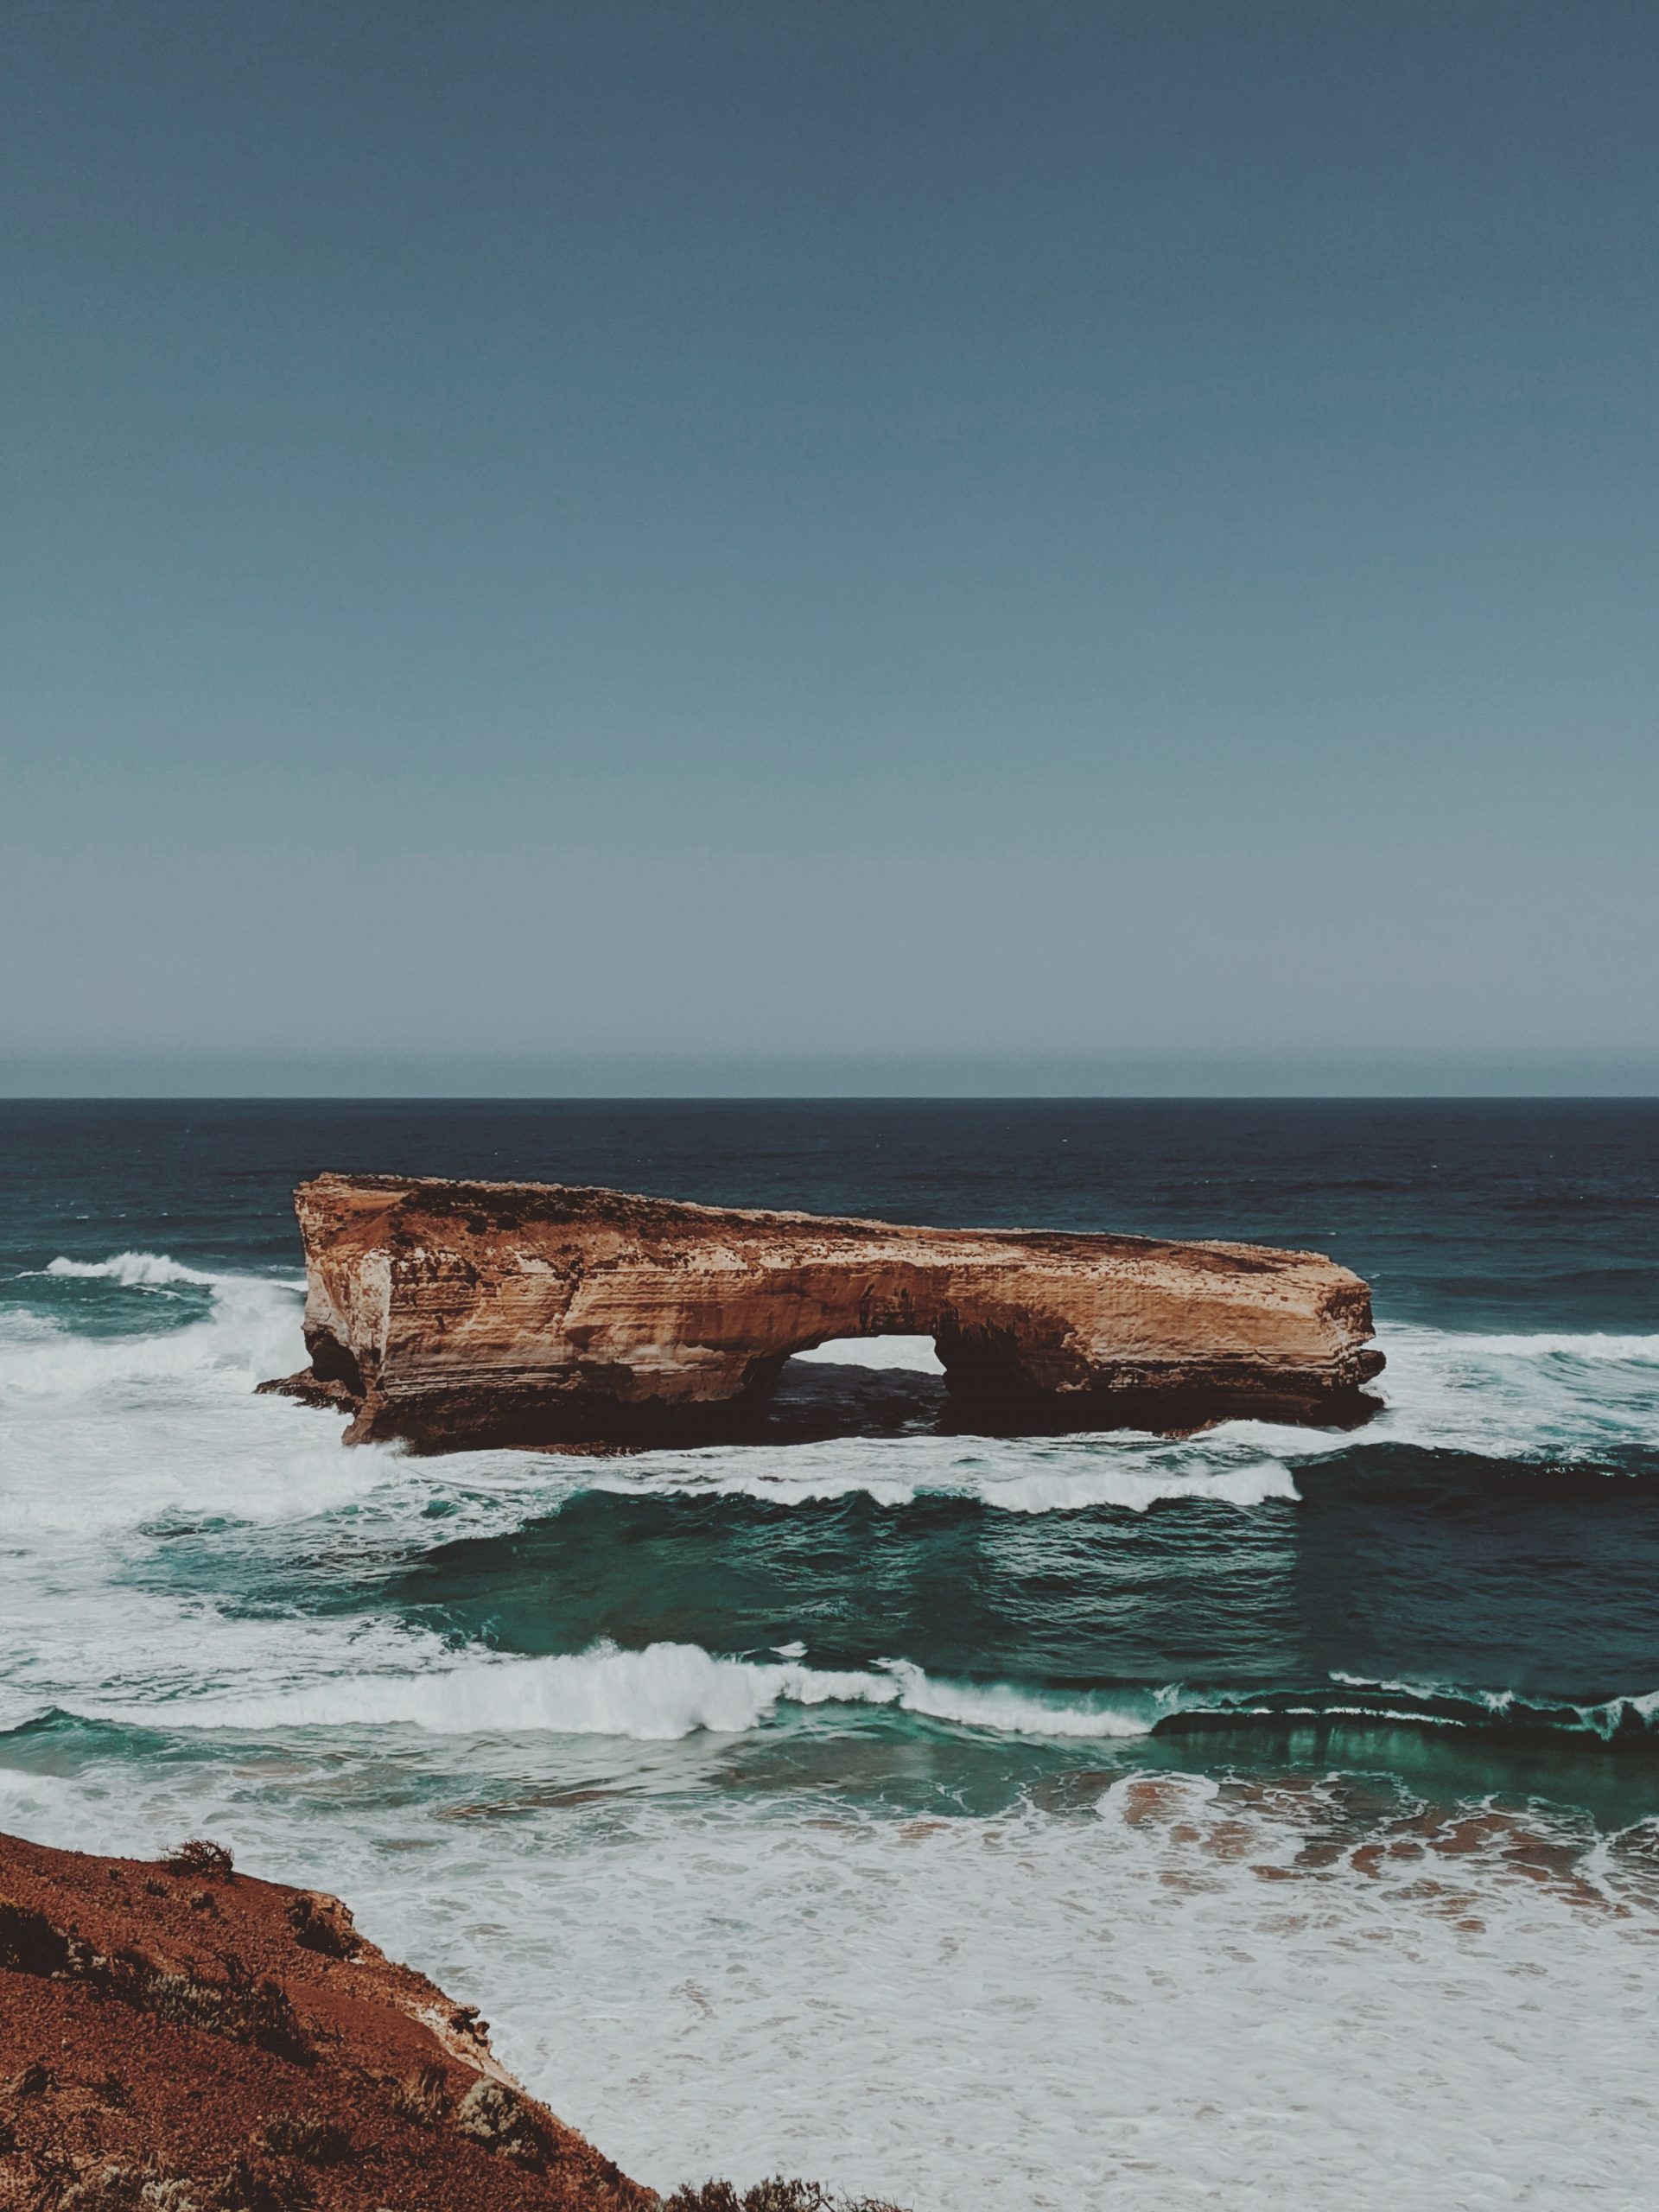 What is the best part of the Great Ocean Road?